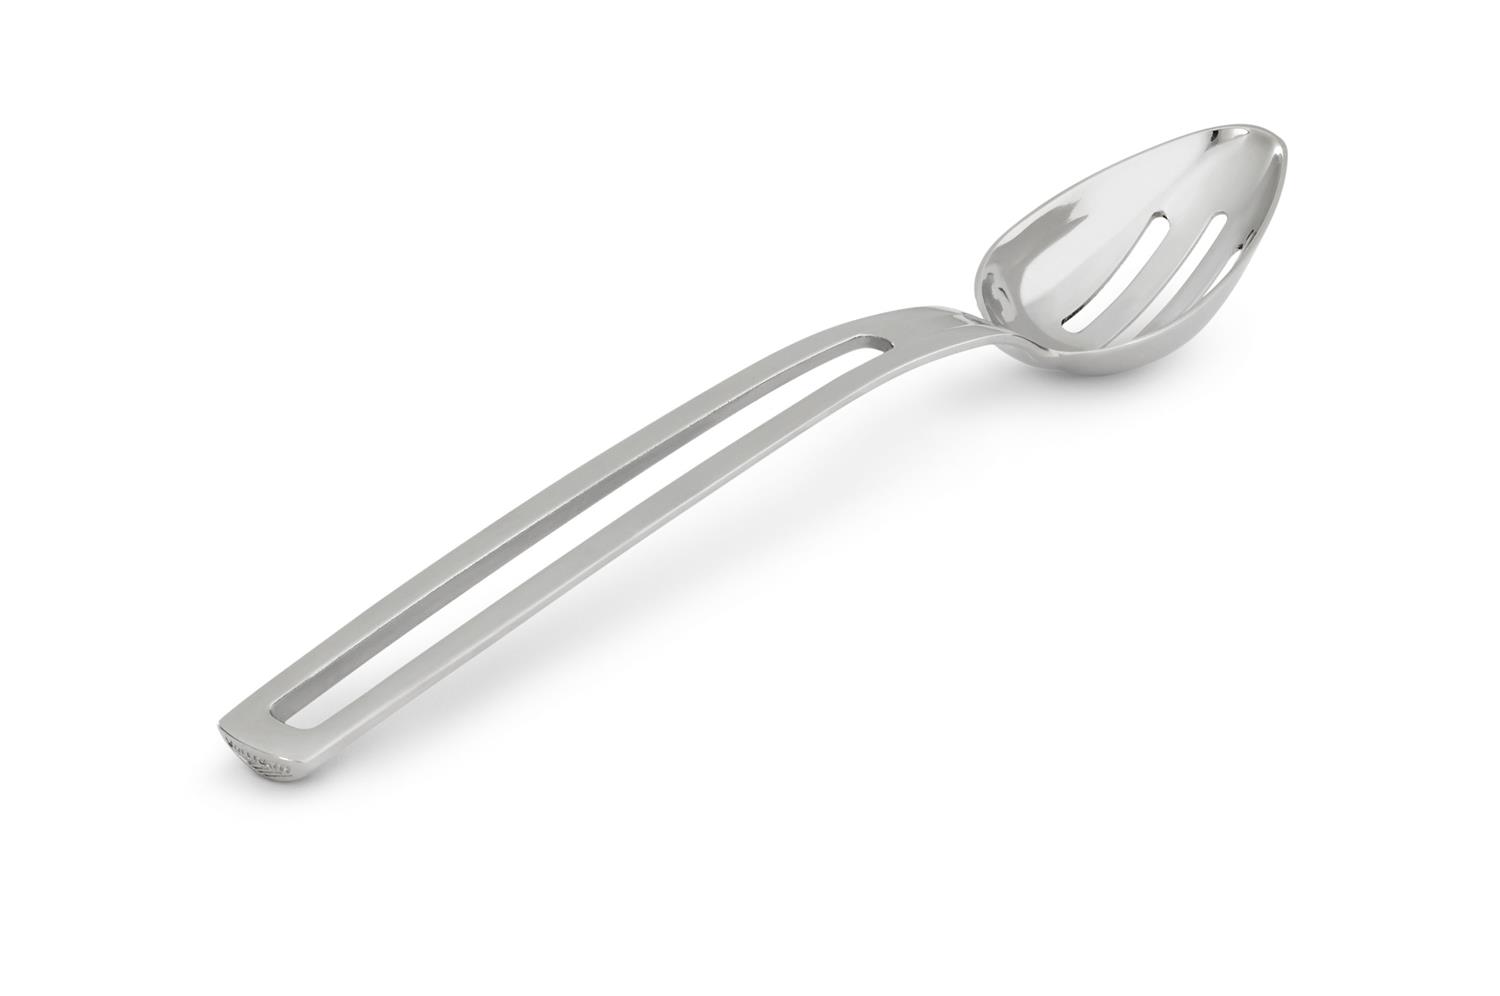 Vollrath 46726 Oval Serving Spoon, Slotted Bowl,